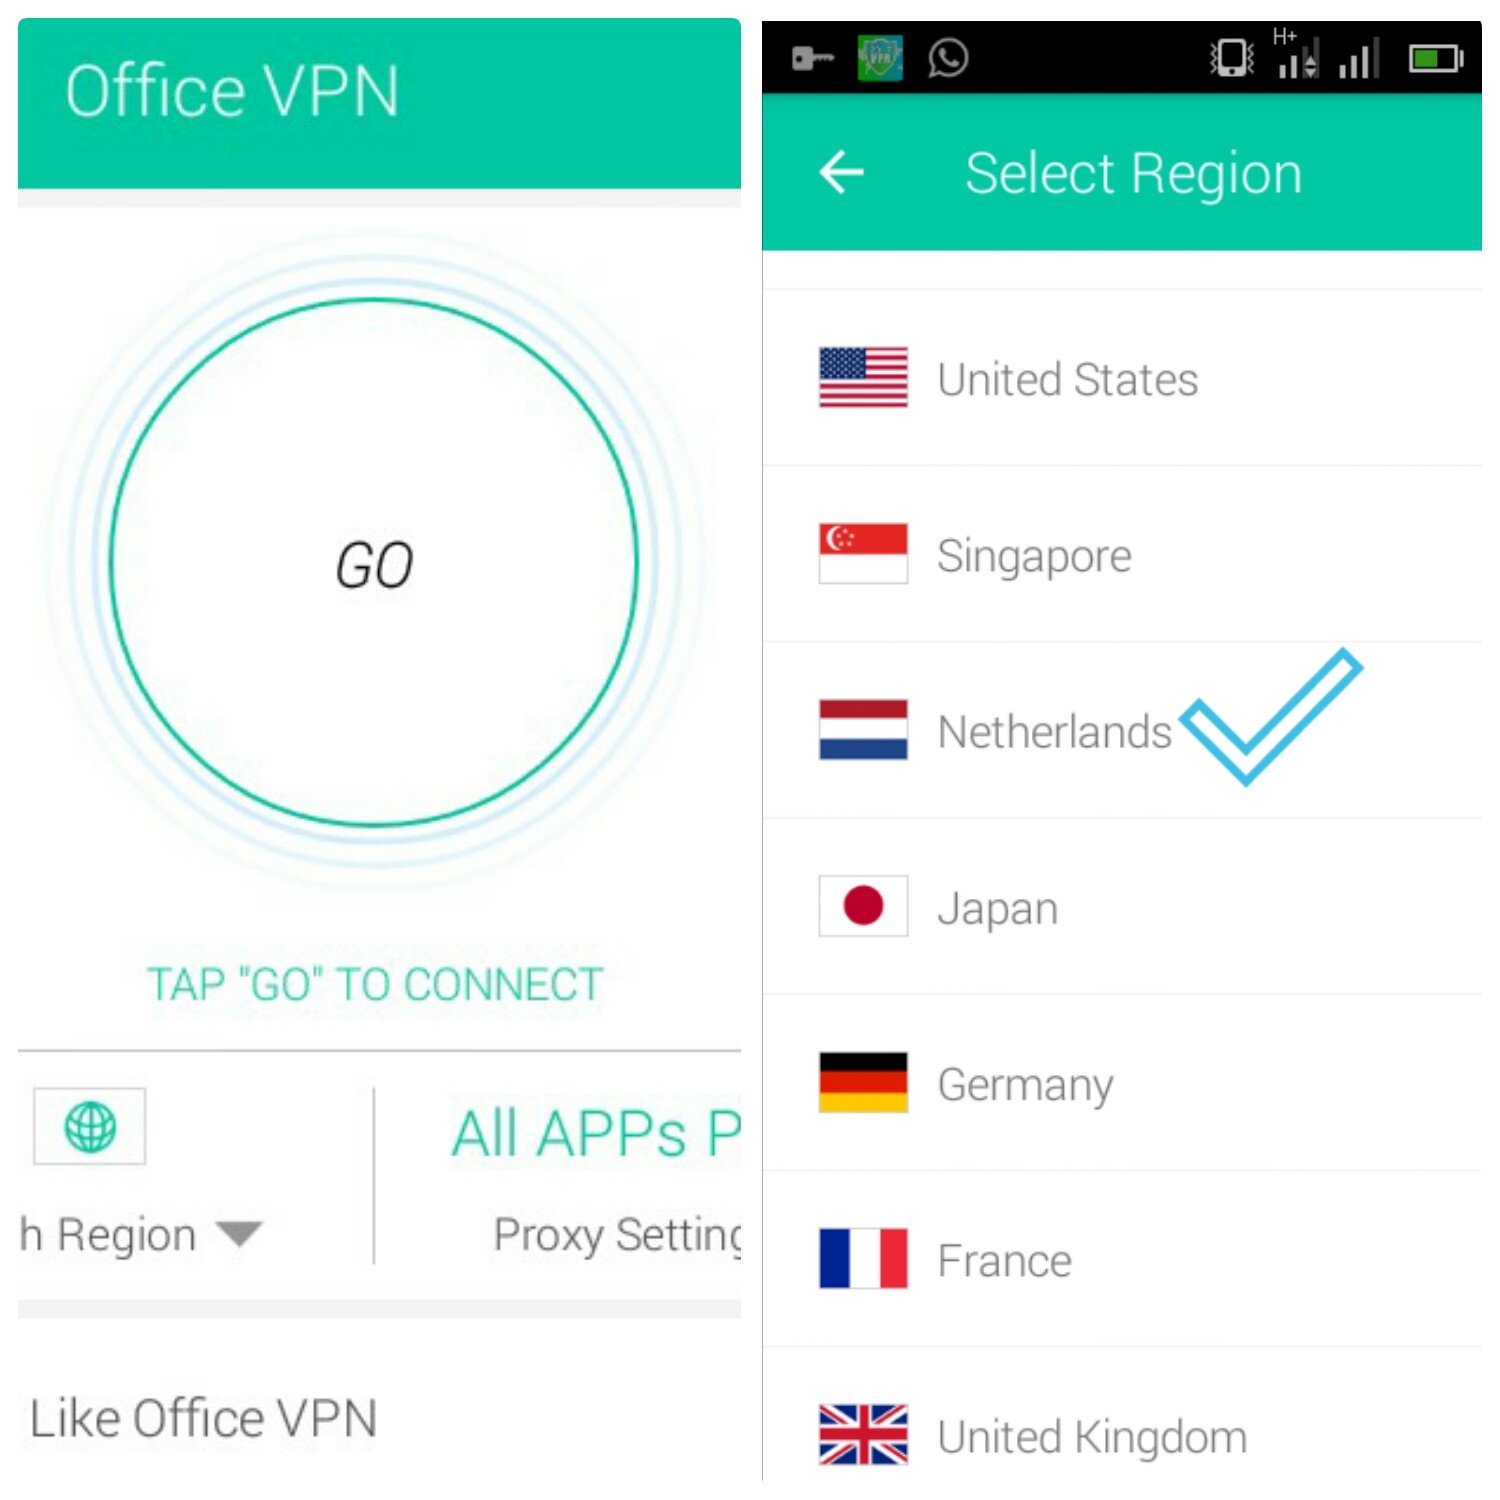 Download OFFICE VPN APK HERE - Android Vpn Zone